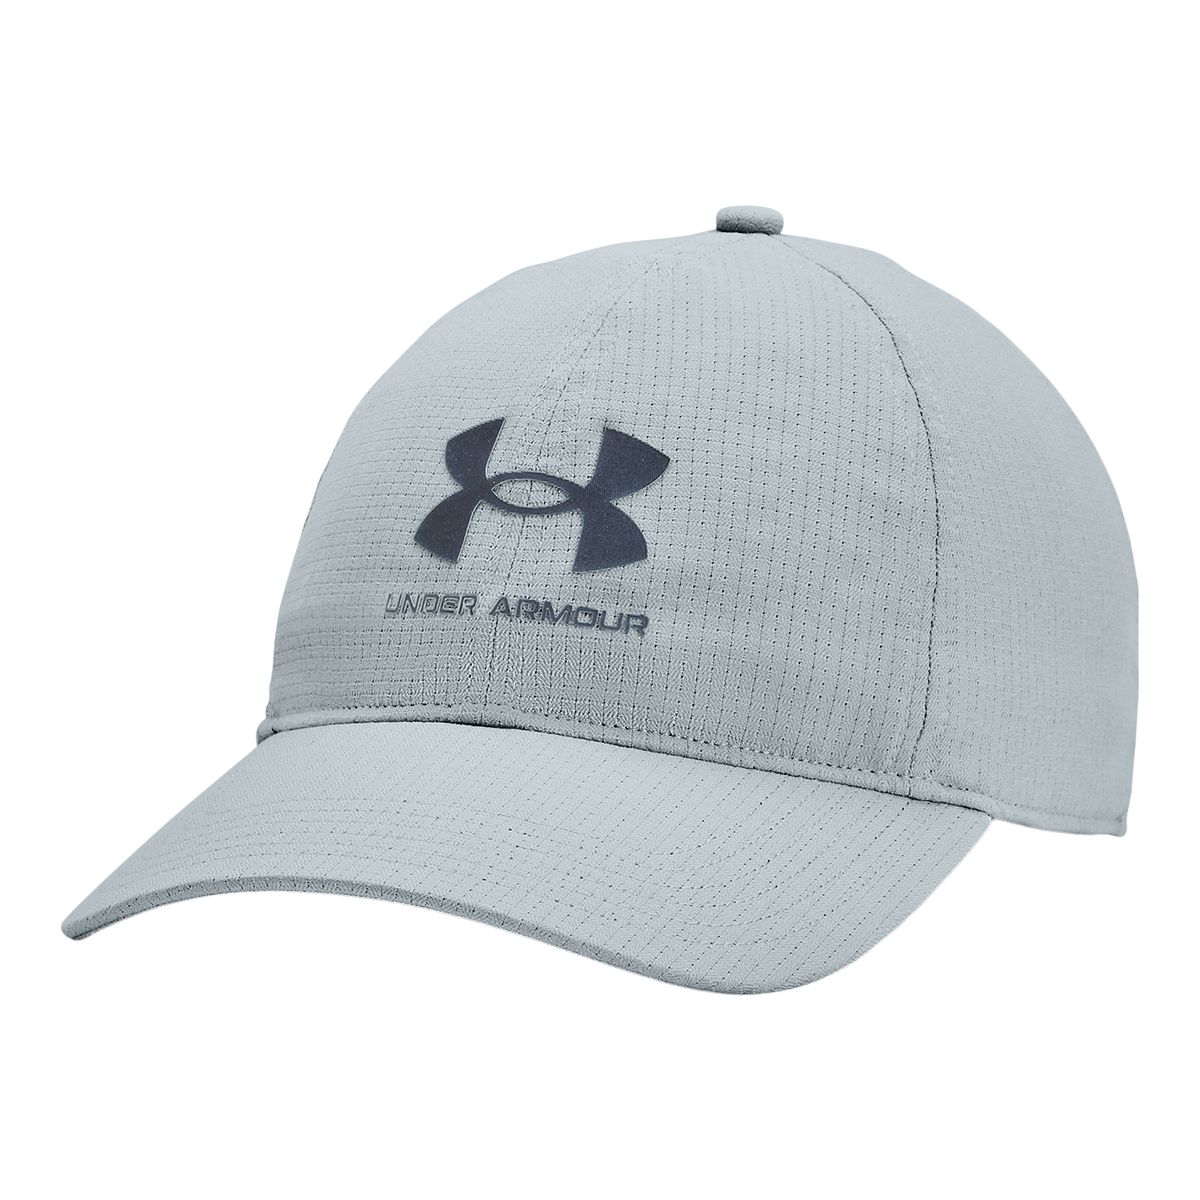 Under Armour Men's Iso-Chill ArmourVent Adjustable Hat - Blue, Osfm